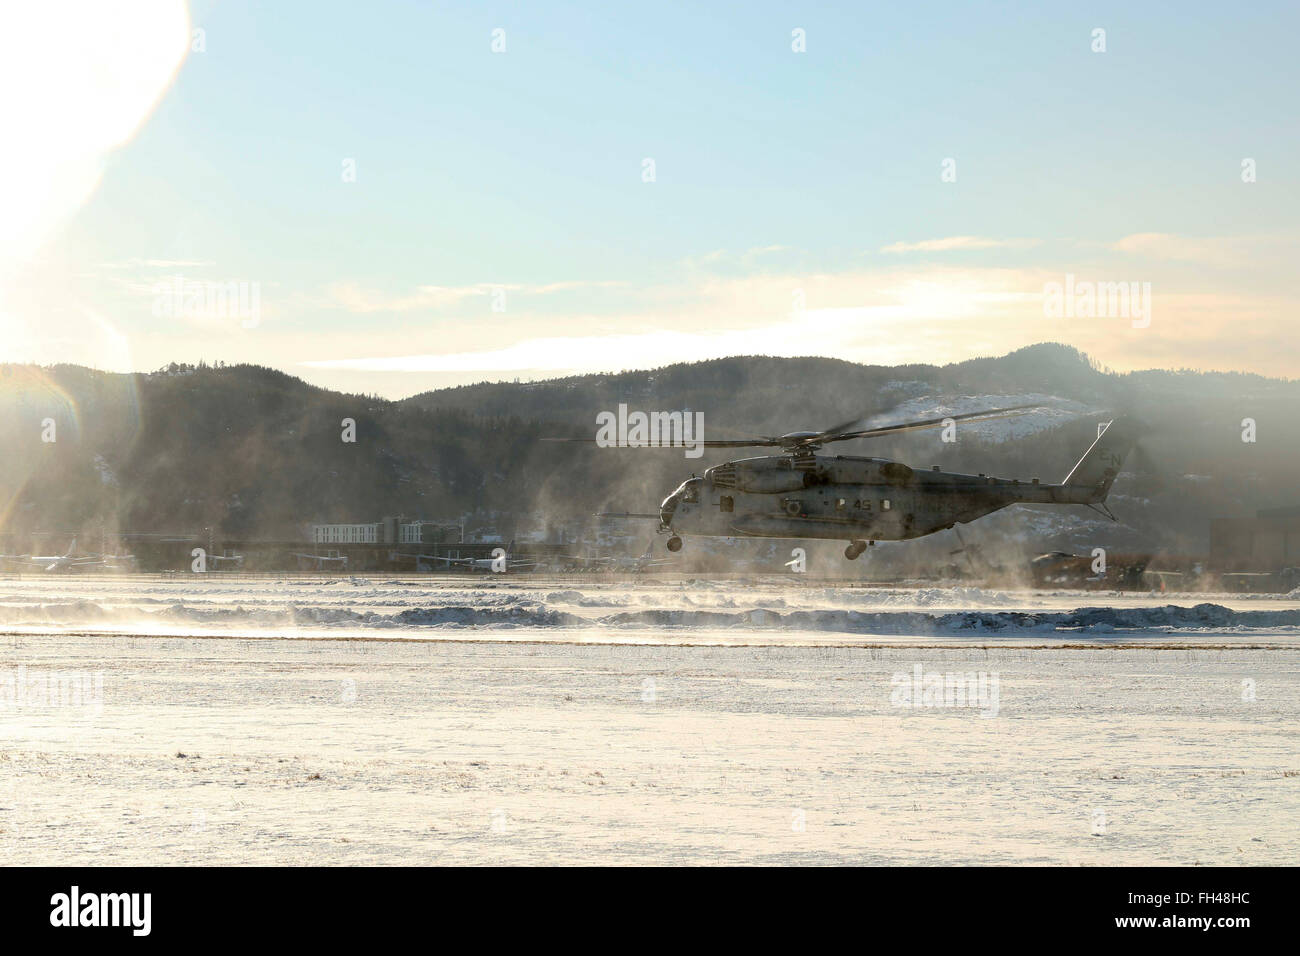 A U.S. Marine Corps CH-53E Super Stallion Helicopter begins its accent at Vaernes, Norway, Feb. 22, 2016, as 2nd Marine Expeditionary Brigade prepares for Exercise Cold Response. All aircraft with Marine Heavy Helicopter Squadron (-) Reinforced, the Air Combat Element of 2d MEB, were dismantled at Marine Corps Air Station Cherry Point, N.C., and flown to Norway in U.S. Air Force C-5 Galaxies to provide air support during the exercise. Cold Response 16 is a combined, joint exercise comprised of 12 NATO allies and partnered nations and approximately 16,000 troops. Stock Photo